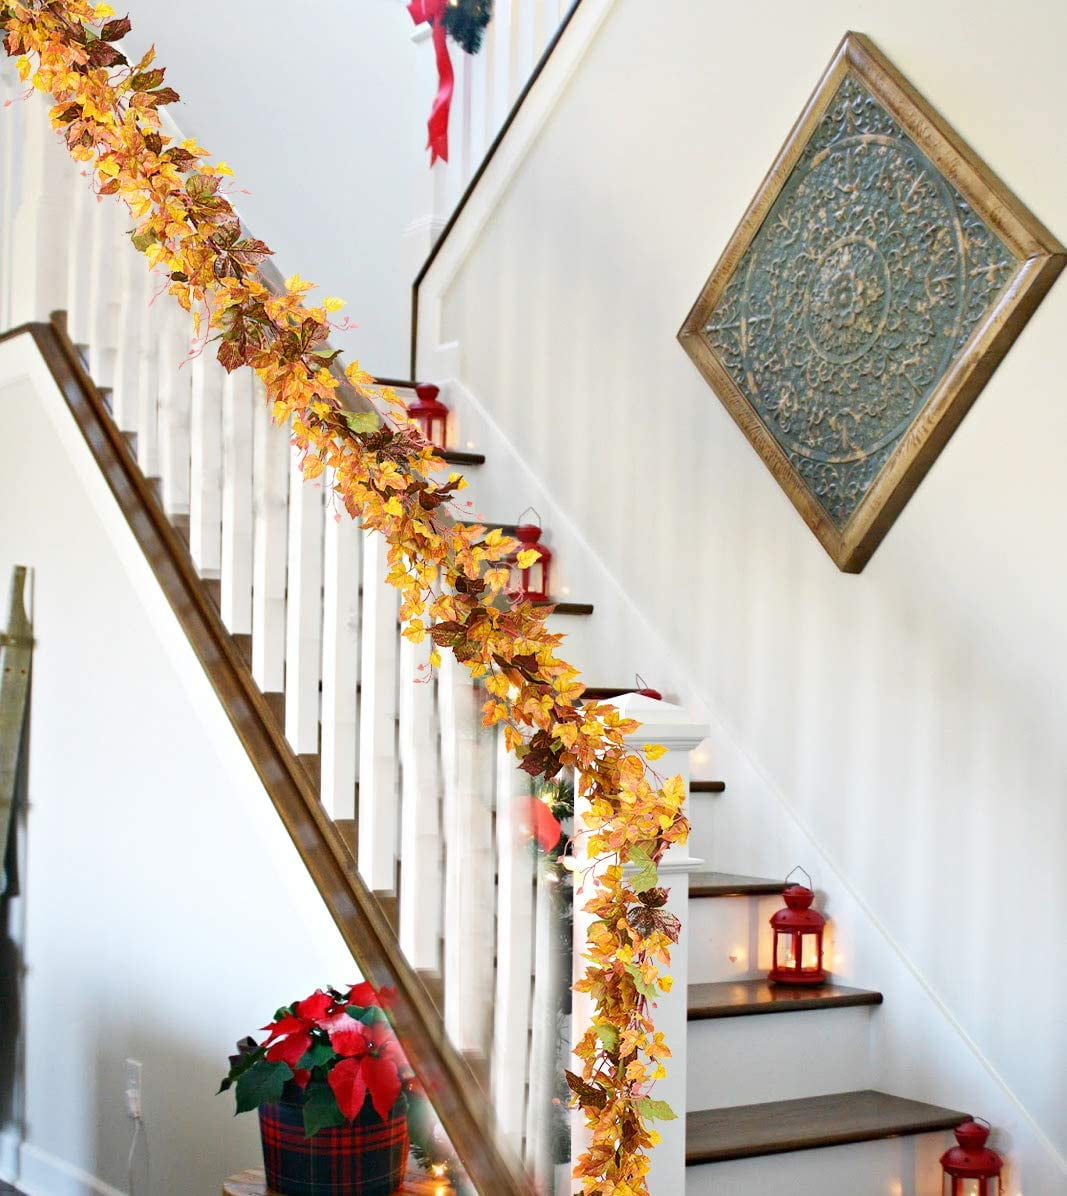 Hanging Vine Garland Artificial Autumn Foliage Garland Thanksgiving Decor for Home Wedding Fireplace Party Christmas 2 Pack Fall Garland Maple Leaf